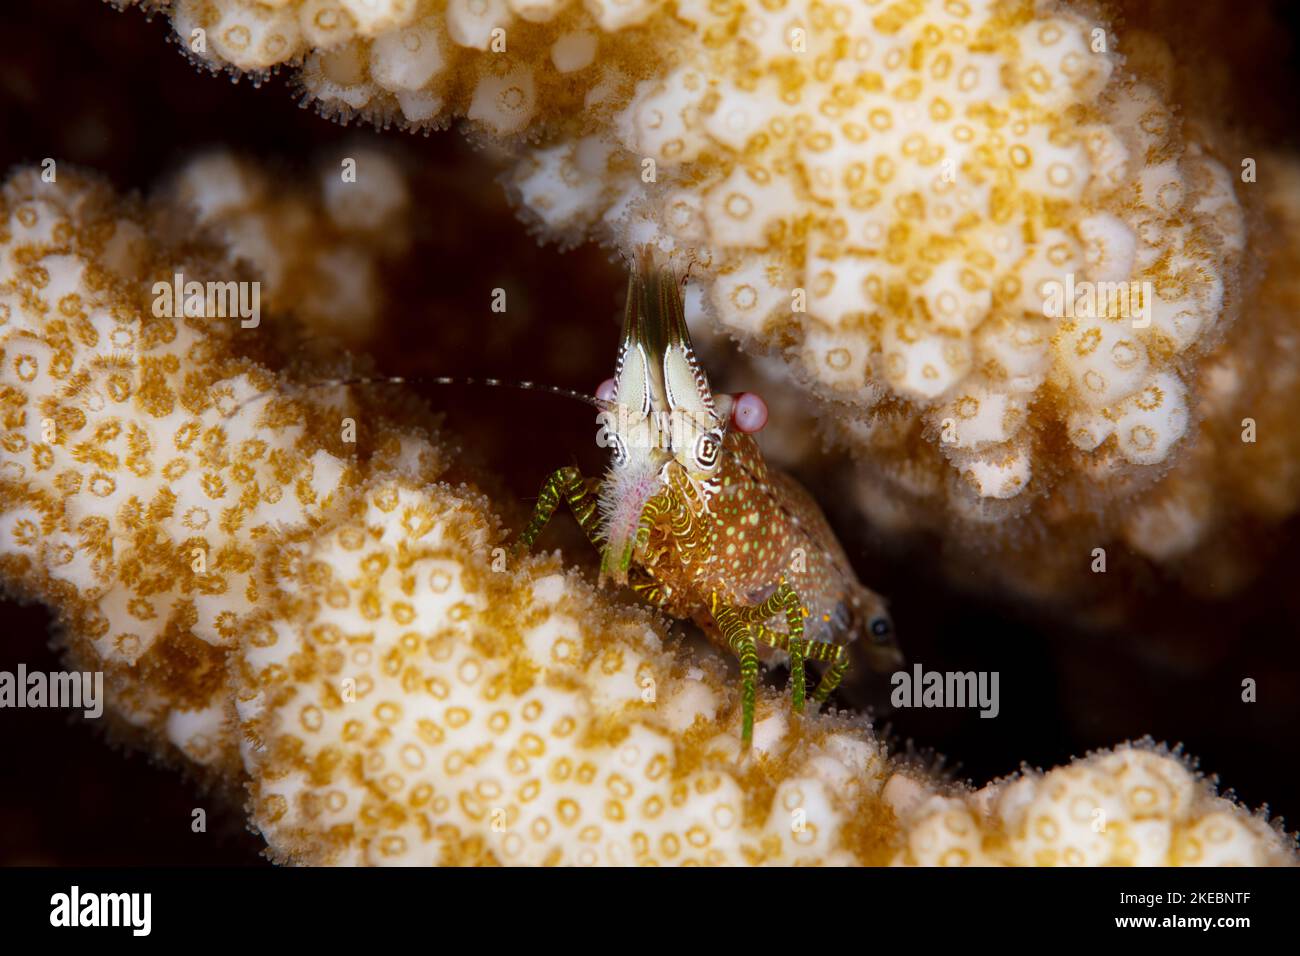 A small shrimp hides in the protective branches of a Pocillopora coral on a coral reef in Indonesia. Crustaceans are extremely prevalent on reefs. Stock Photo